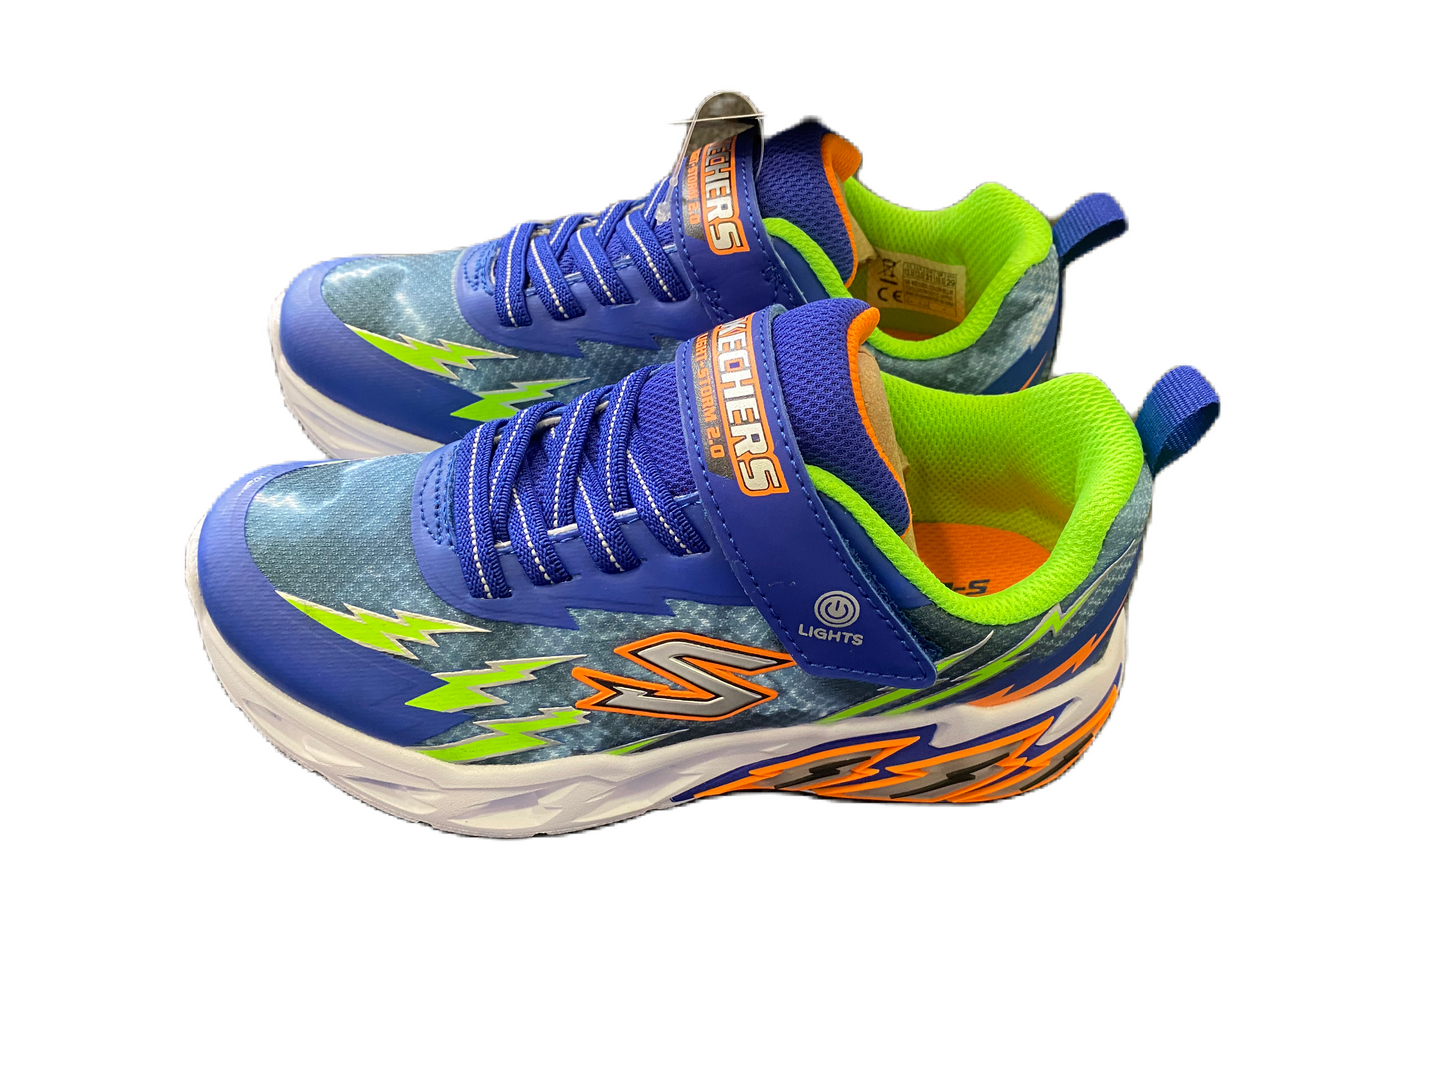 Geox light up storm trainers